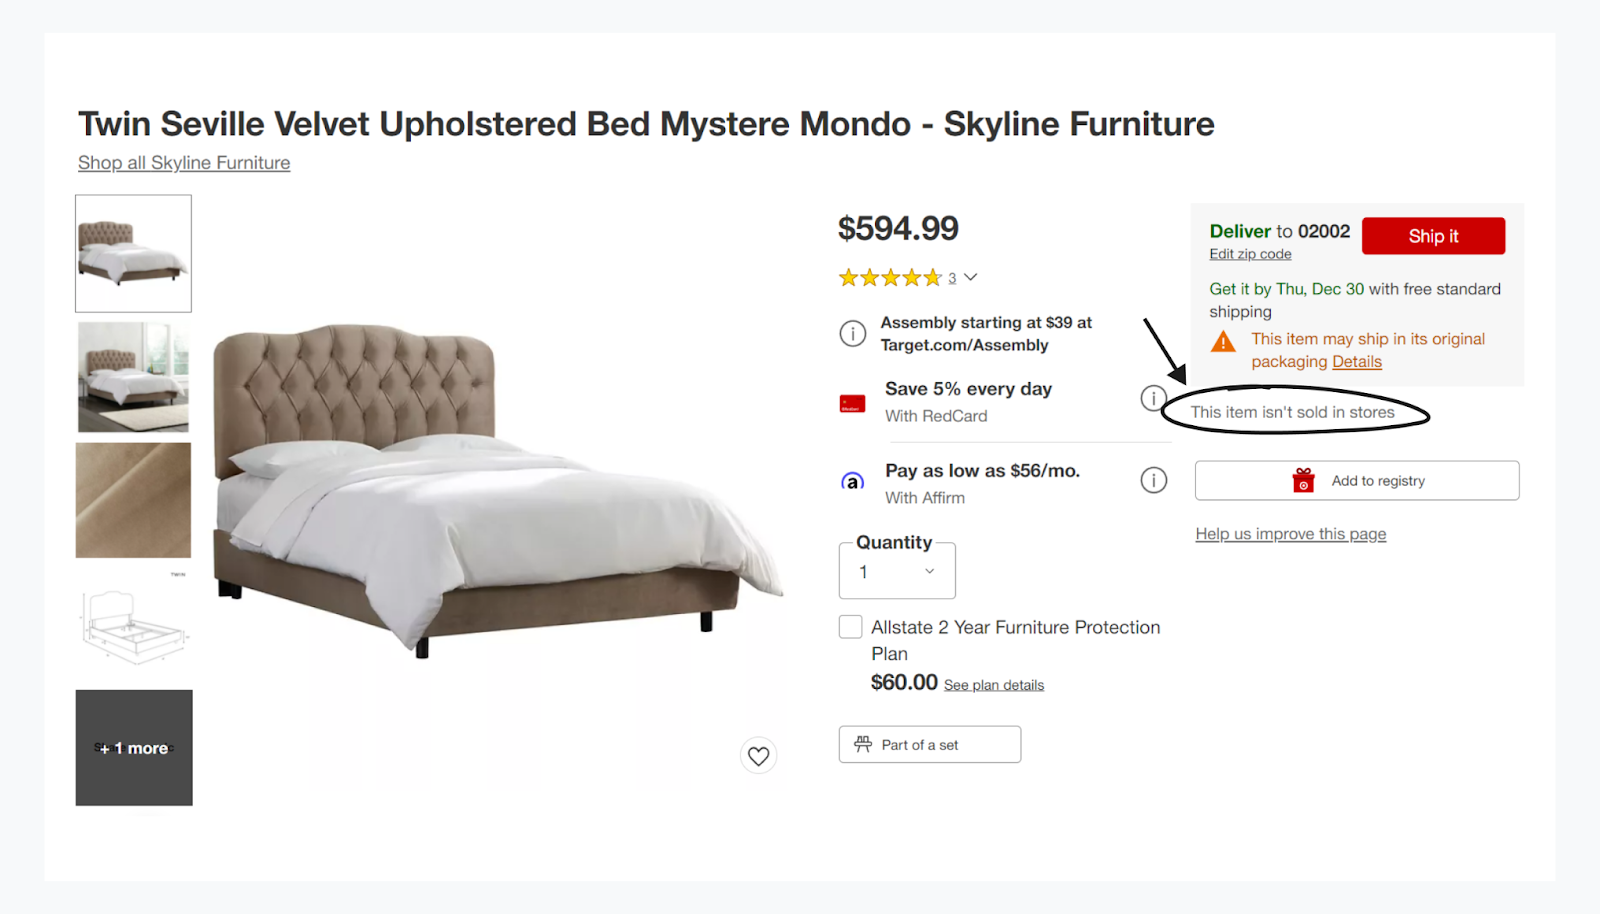 Image of a bed frame from Target that’s only available online.